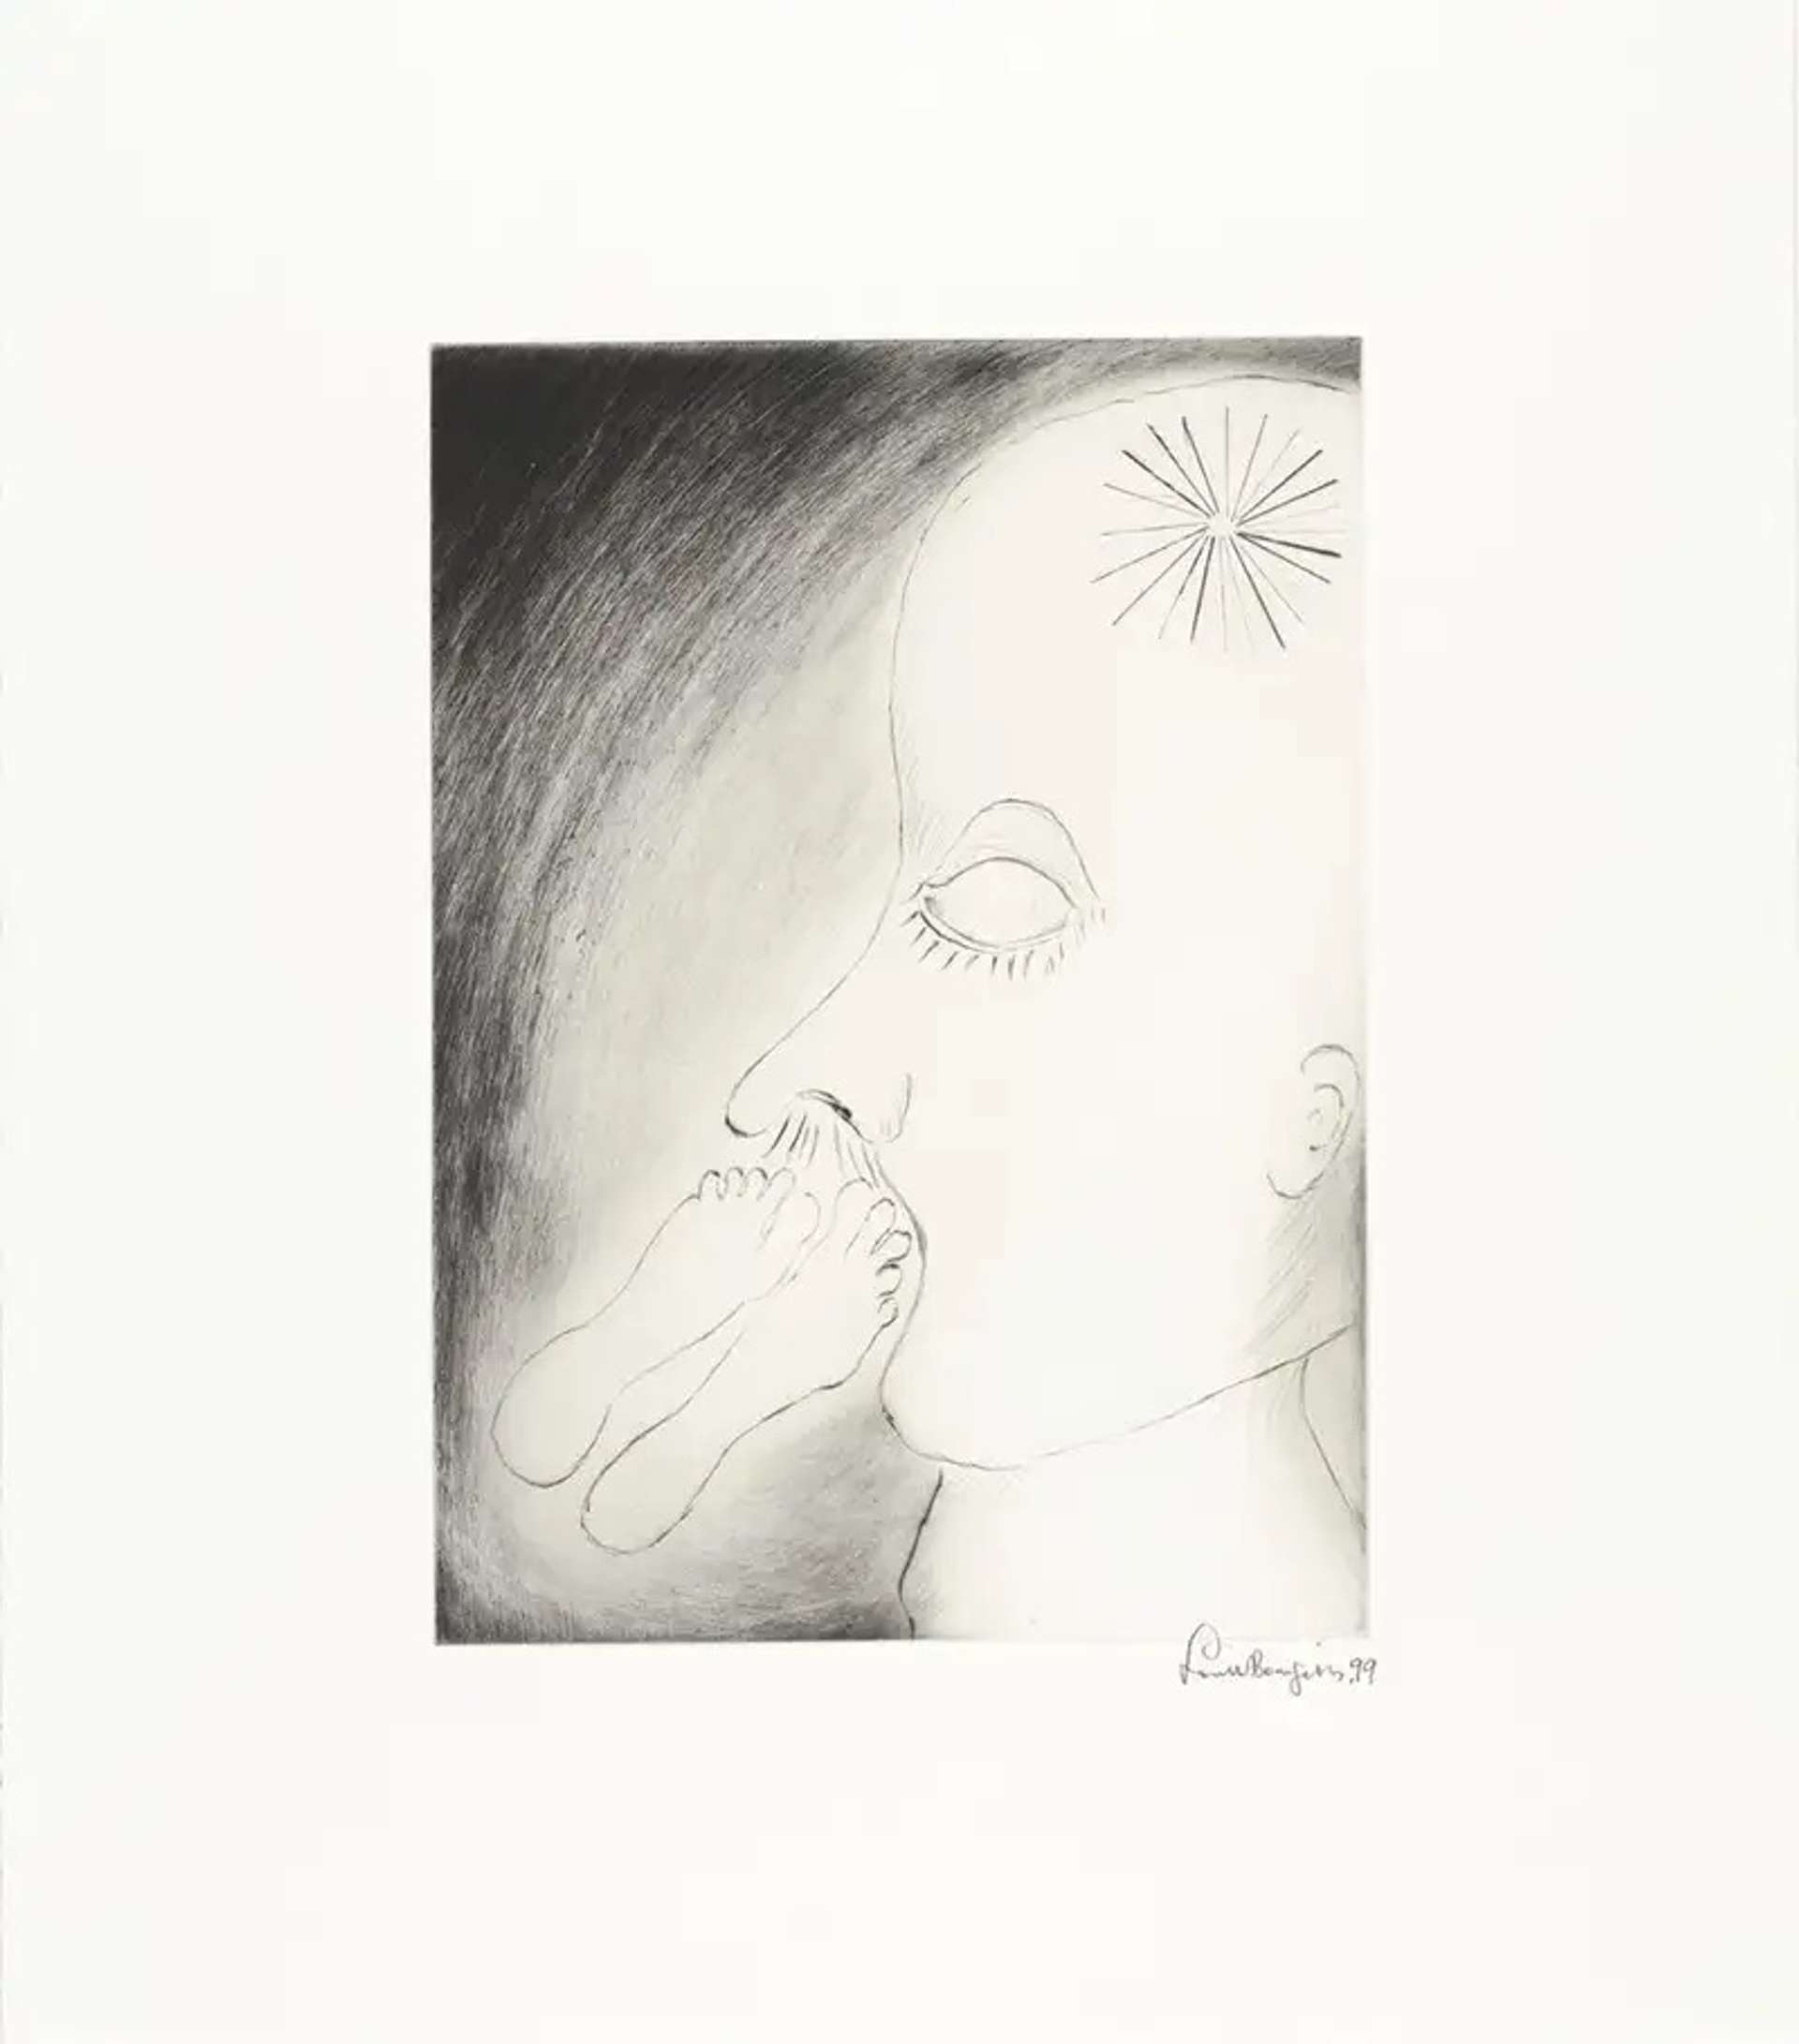 Louise Bourgeois’ The Smell Of Feet. A drypoint print of a head smelling two feet, directly under its nose.